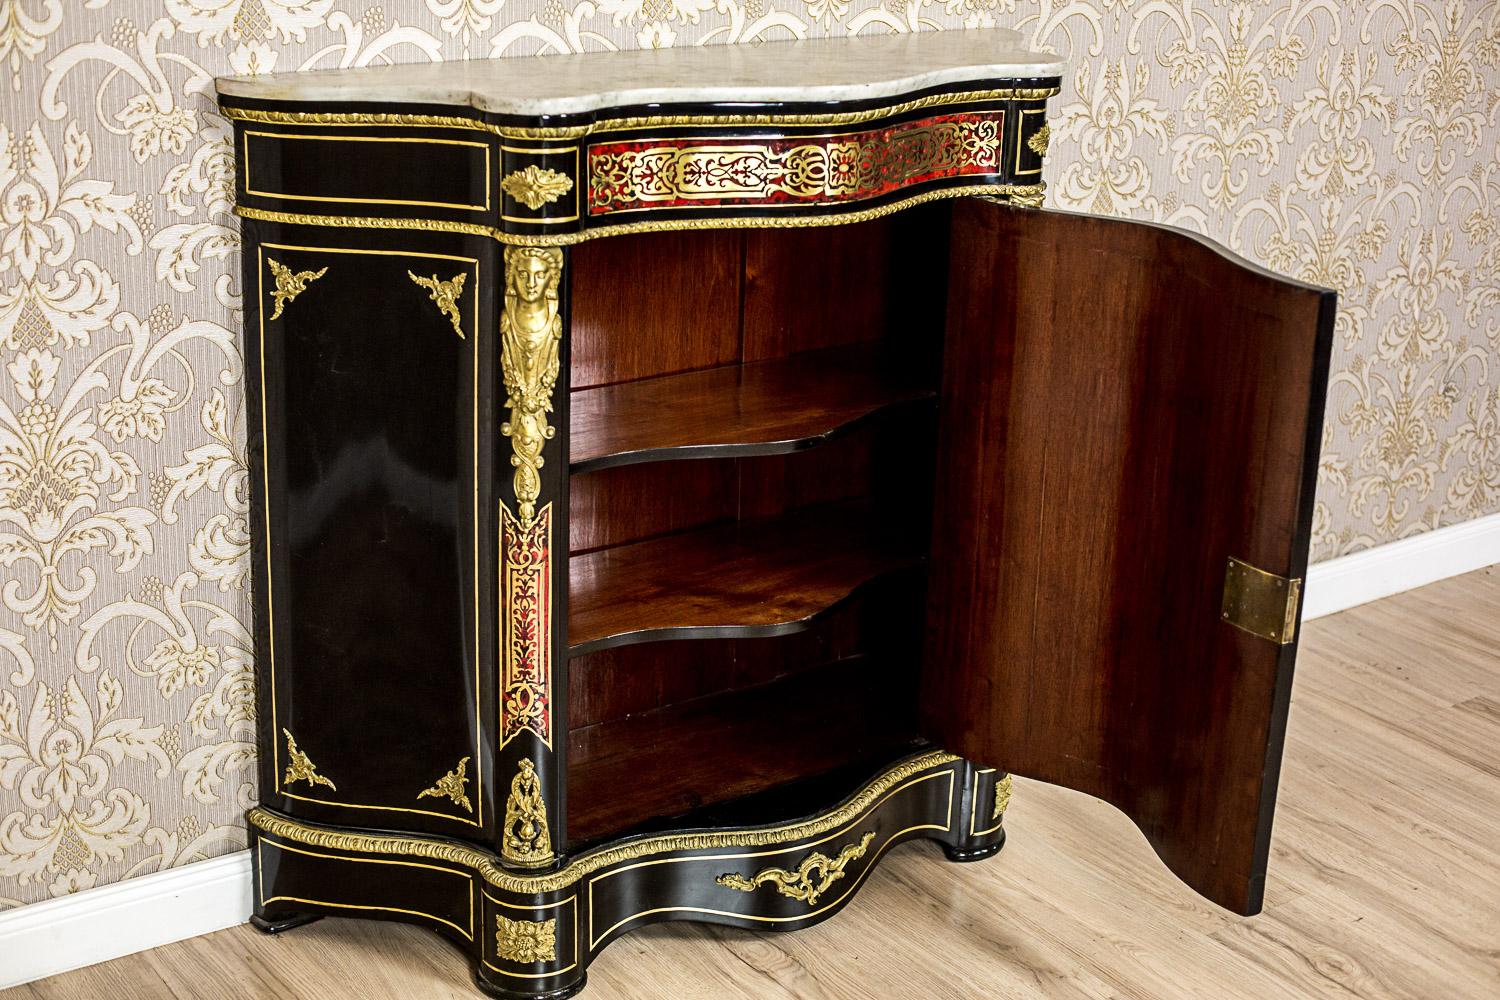 French Neo-Baroque Commode in the Boulle Type from 19th Century